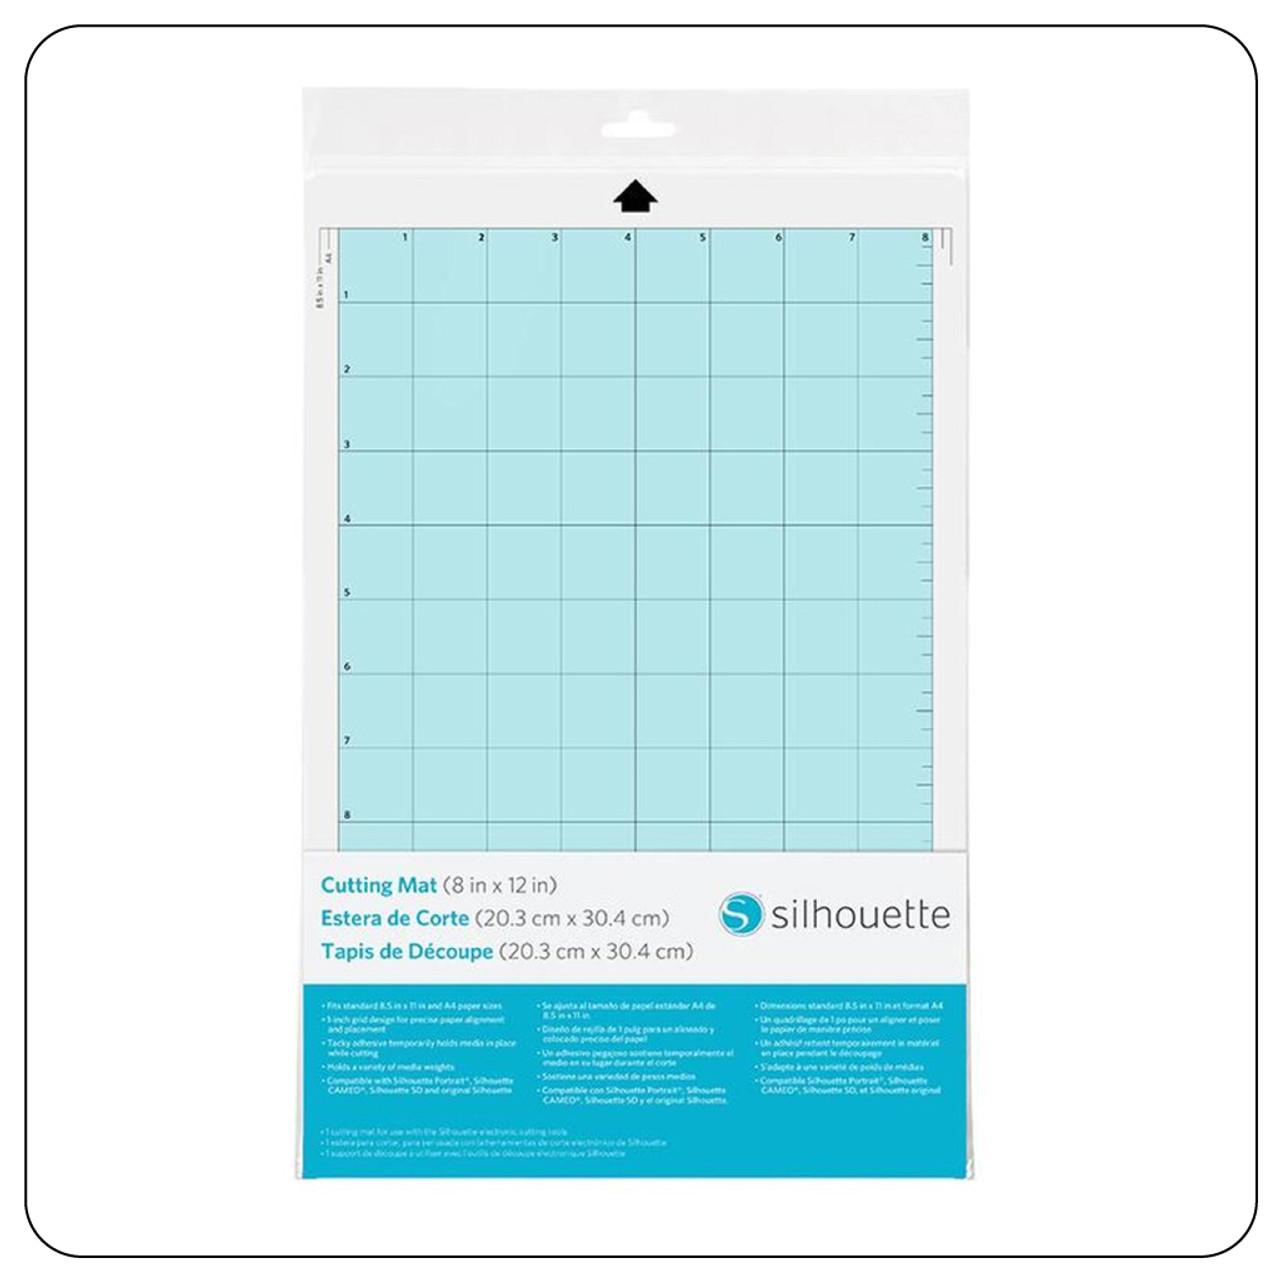 How to Clean Silhouette CAMEO Cutting Mat • The Pinning Mama